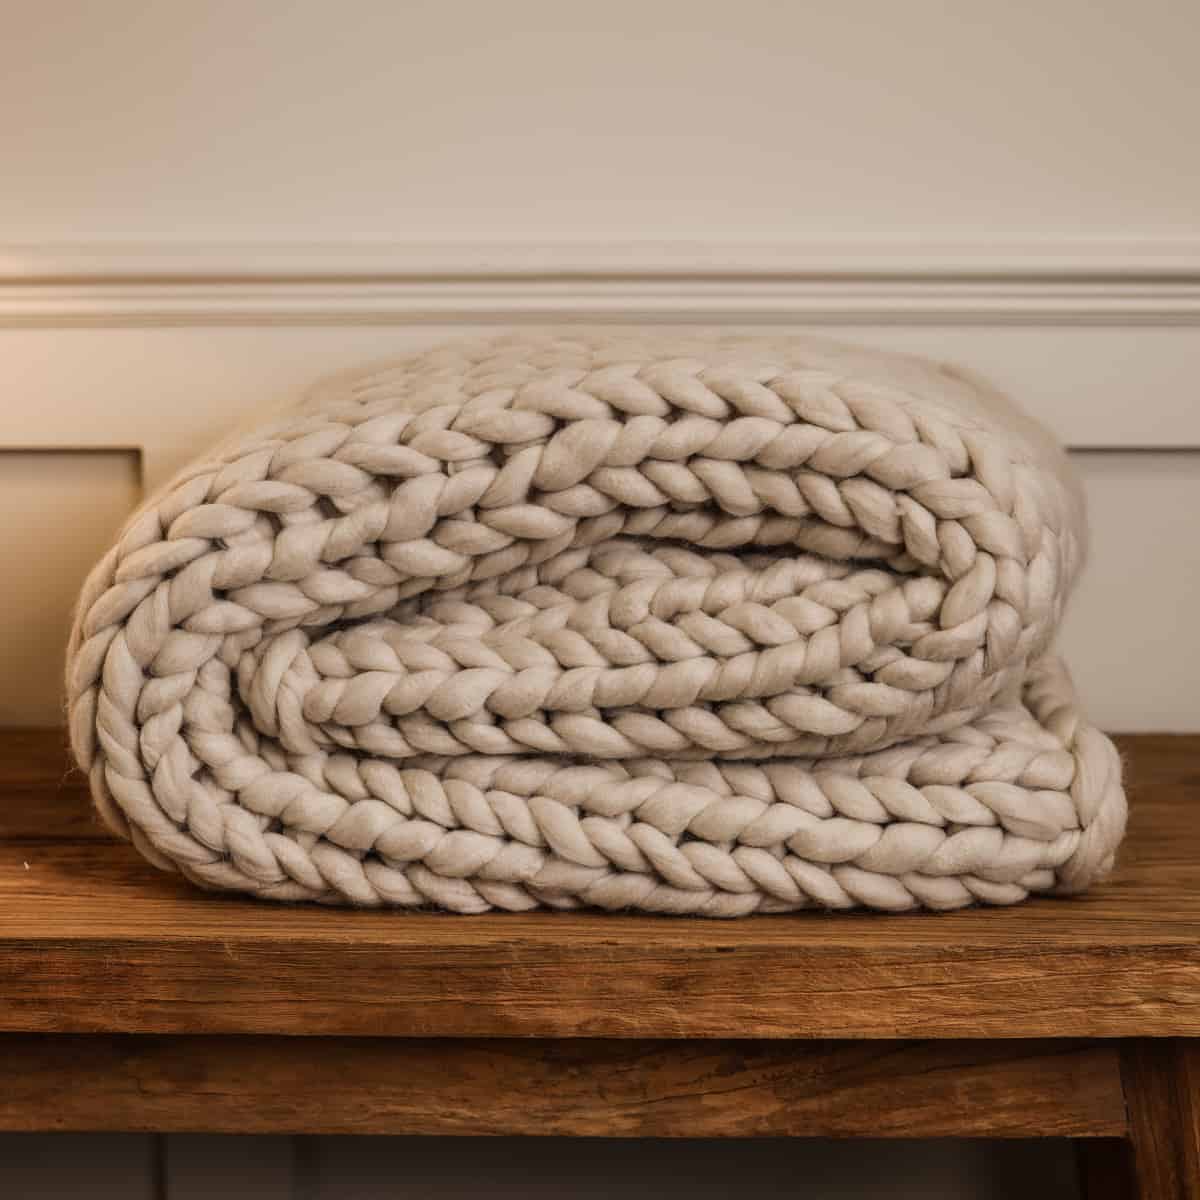 Chunky cream knitted blanket folded up on console.